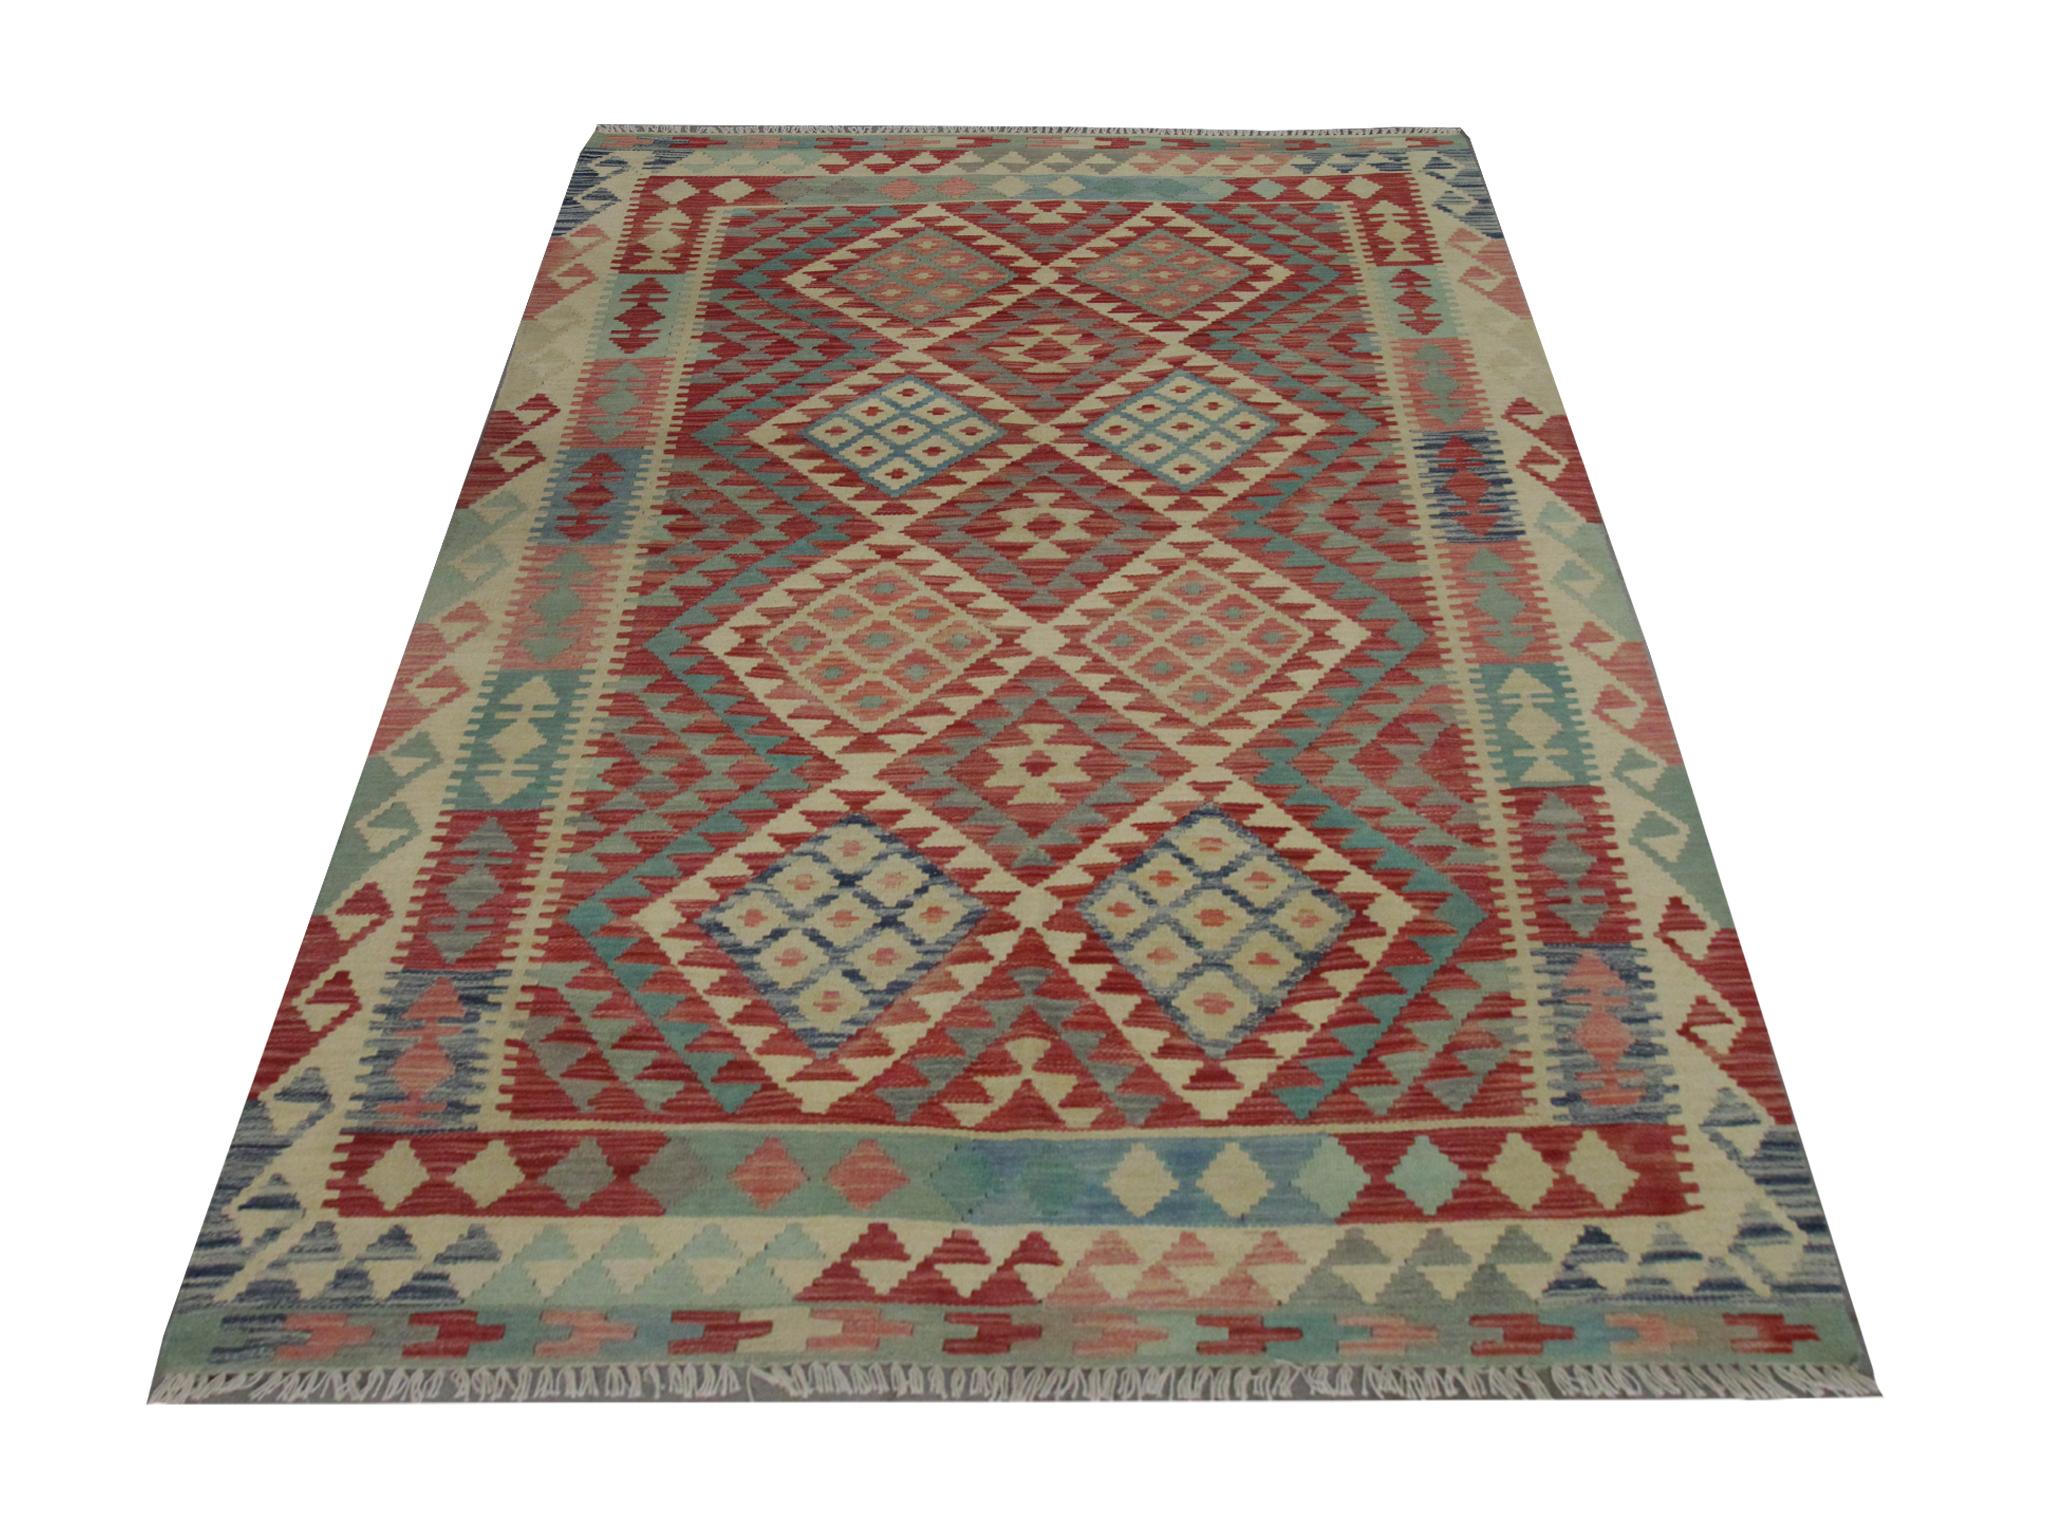 This sophisticated geometric kilim is a new traditional Afghan area rug woven by hand in the early 21st century. The central design is bold and beautiful, featuring a repeating diamond geometric pattern woven in pink, blue and beige accents, framed